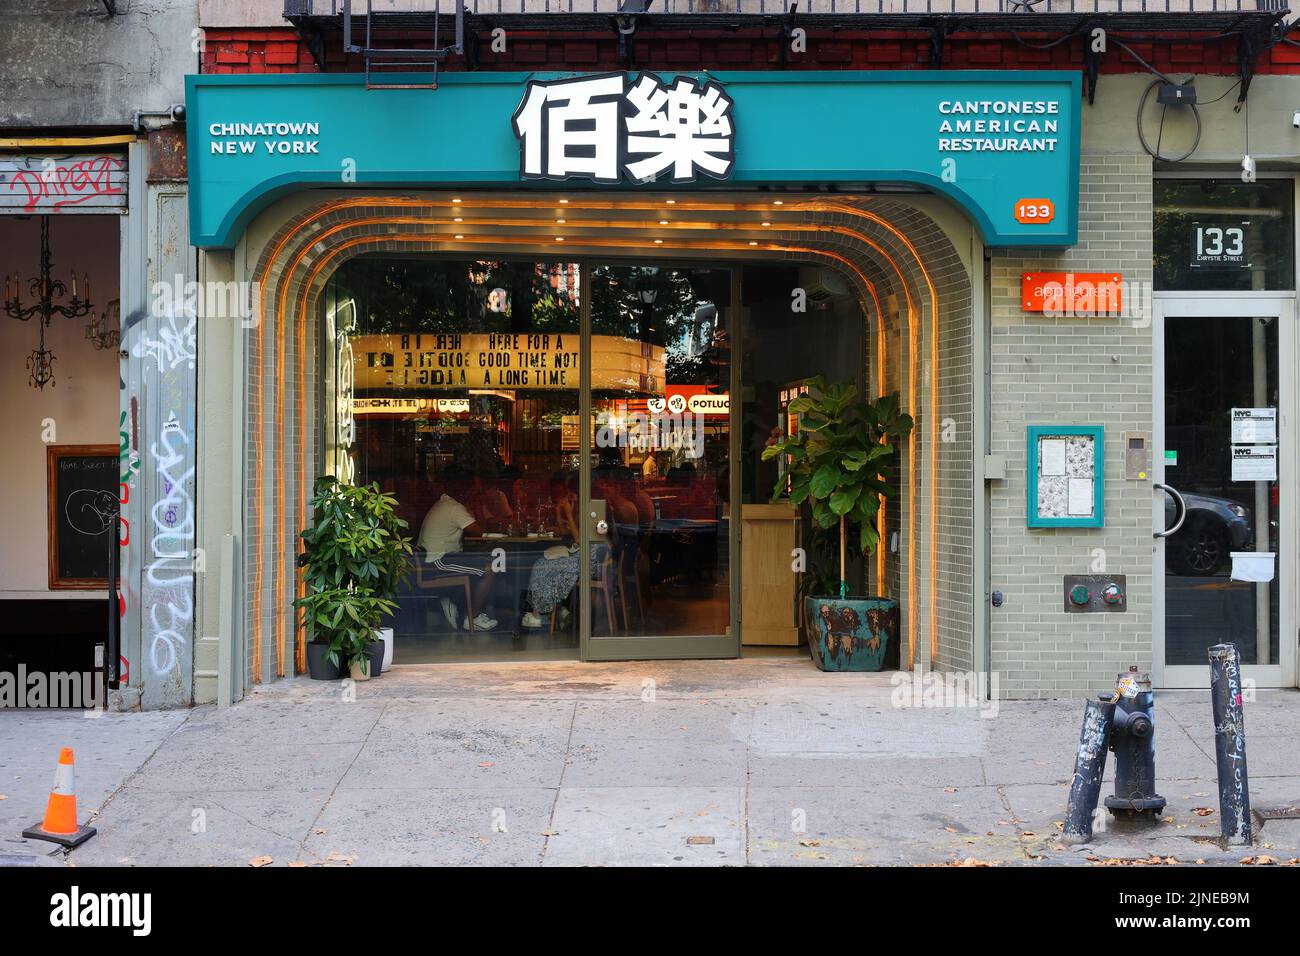 Potluck Club 百樂, 133 Chrystie St, New York, NYC storefront photo of a Cantonese Chinese restaurant in Manhattan Chinatown/Lower East Side. Stock Photo